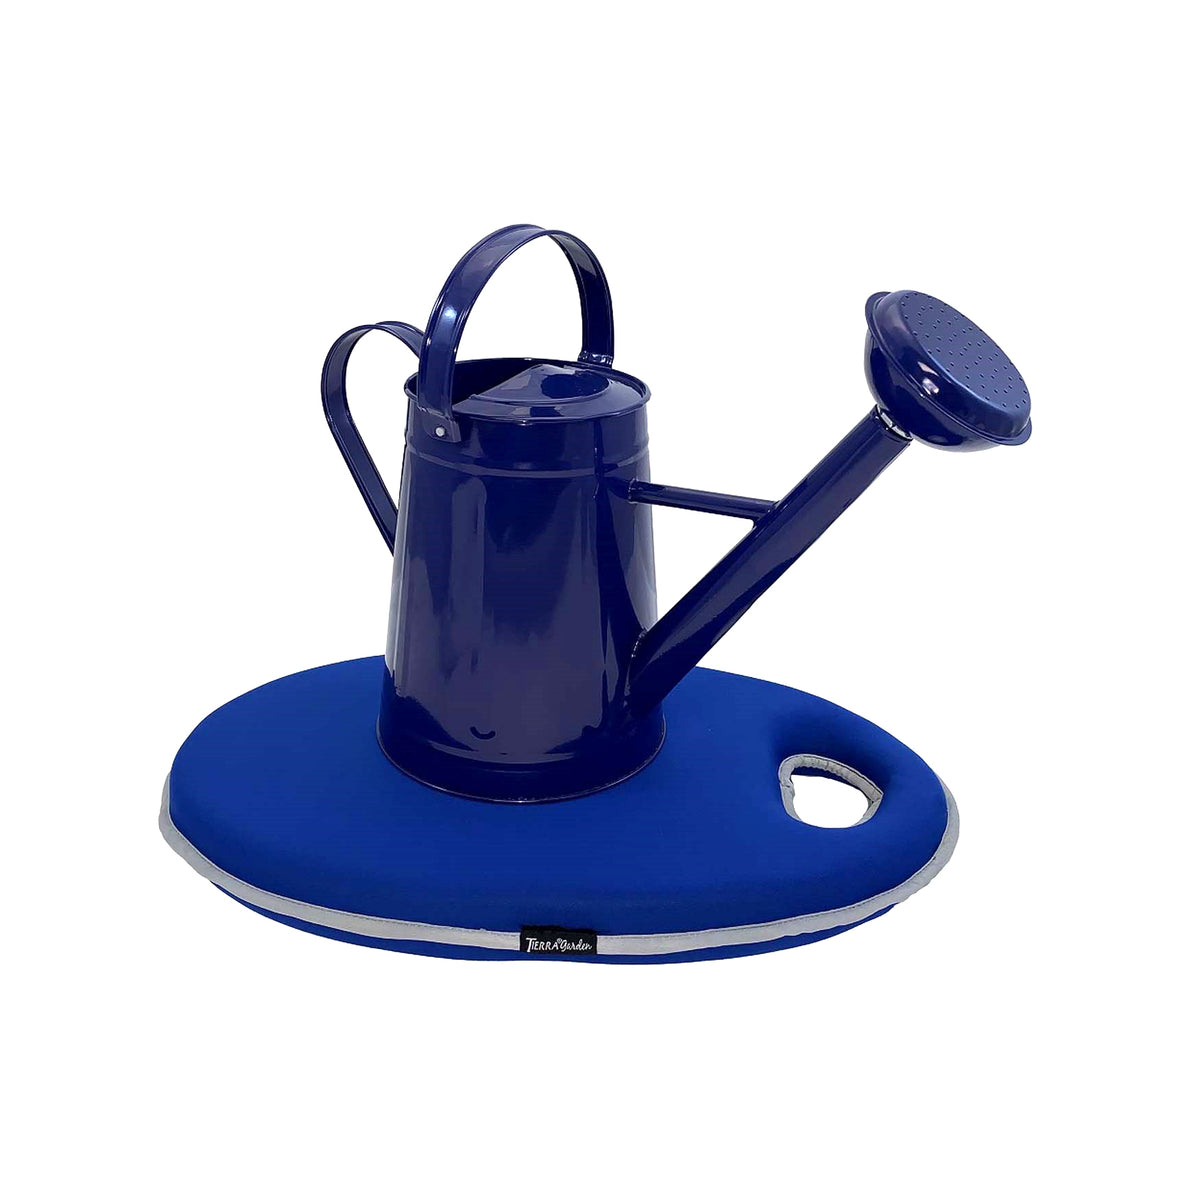 Blue 1.2 gallon metal watering can.  Constructed with powder coated galvanized steel. 18&quot;L x 7.5&quot;W x 13&quot;H 1.5lbs. Waterproof memory foam kneeling cushion included (20&quot;Lx12.25&quot;W 0.7 lbs).